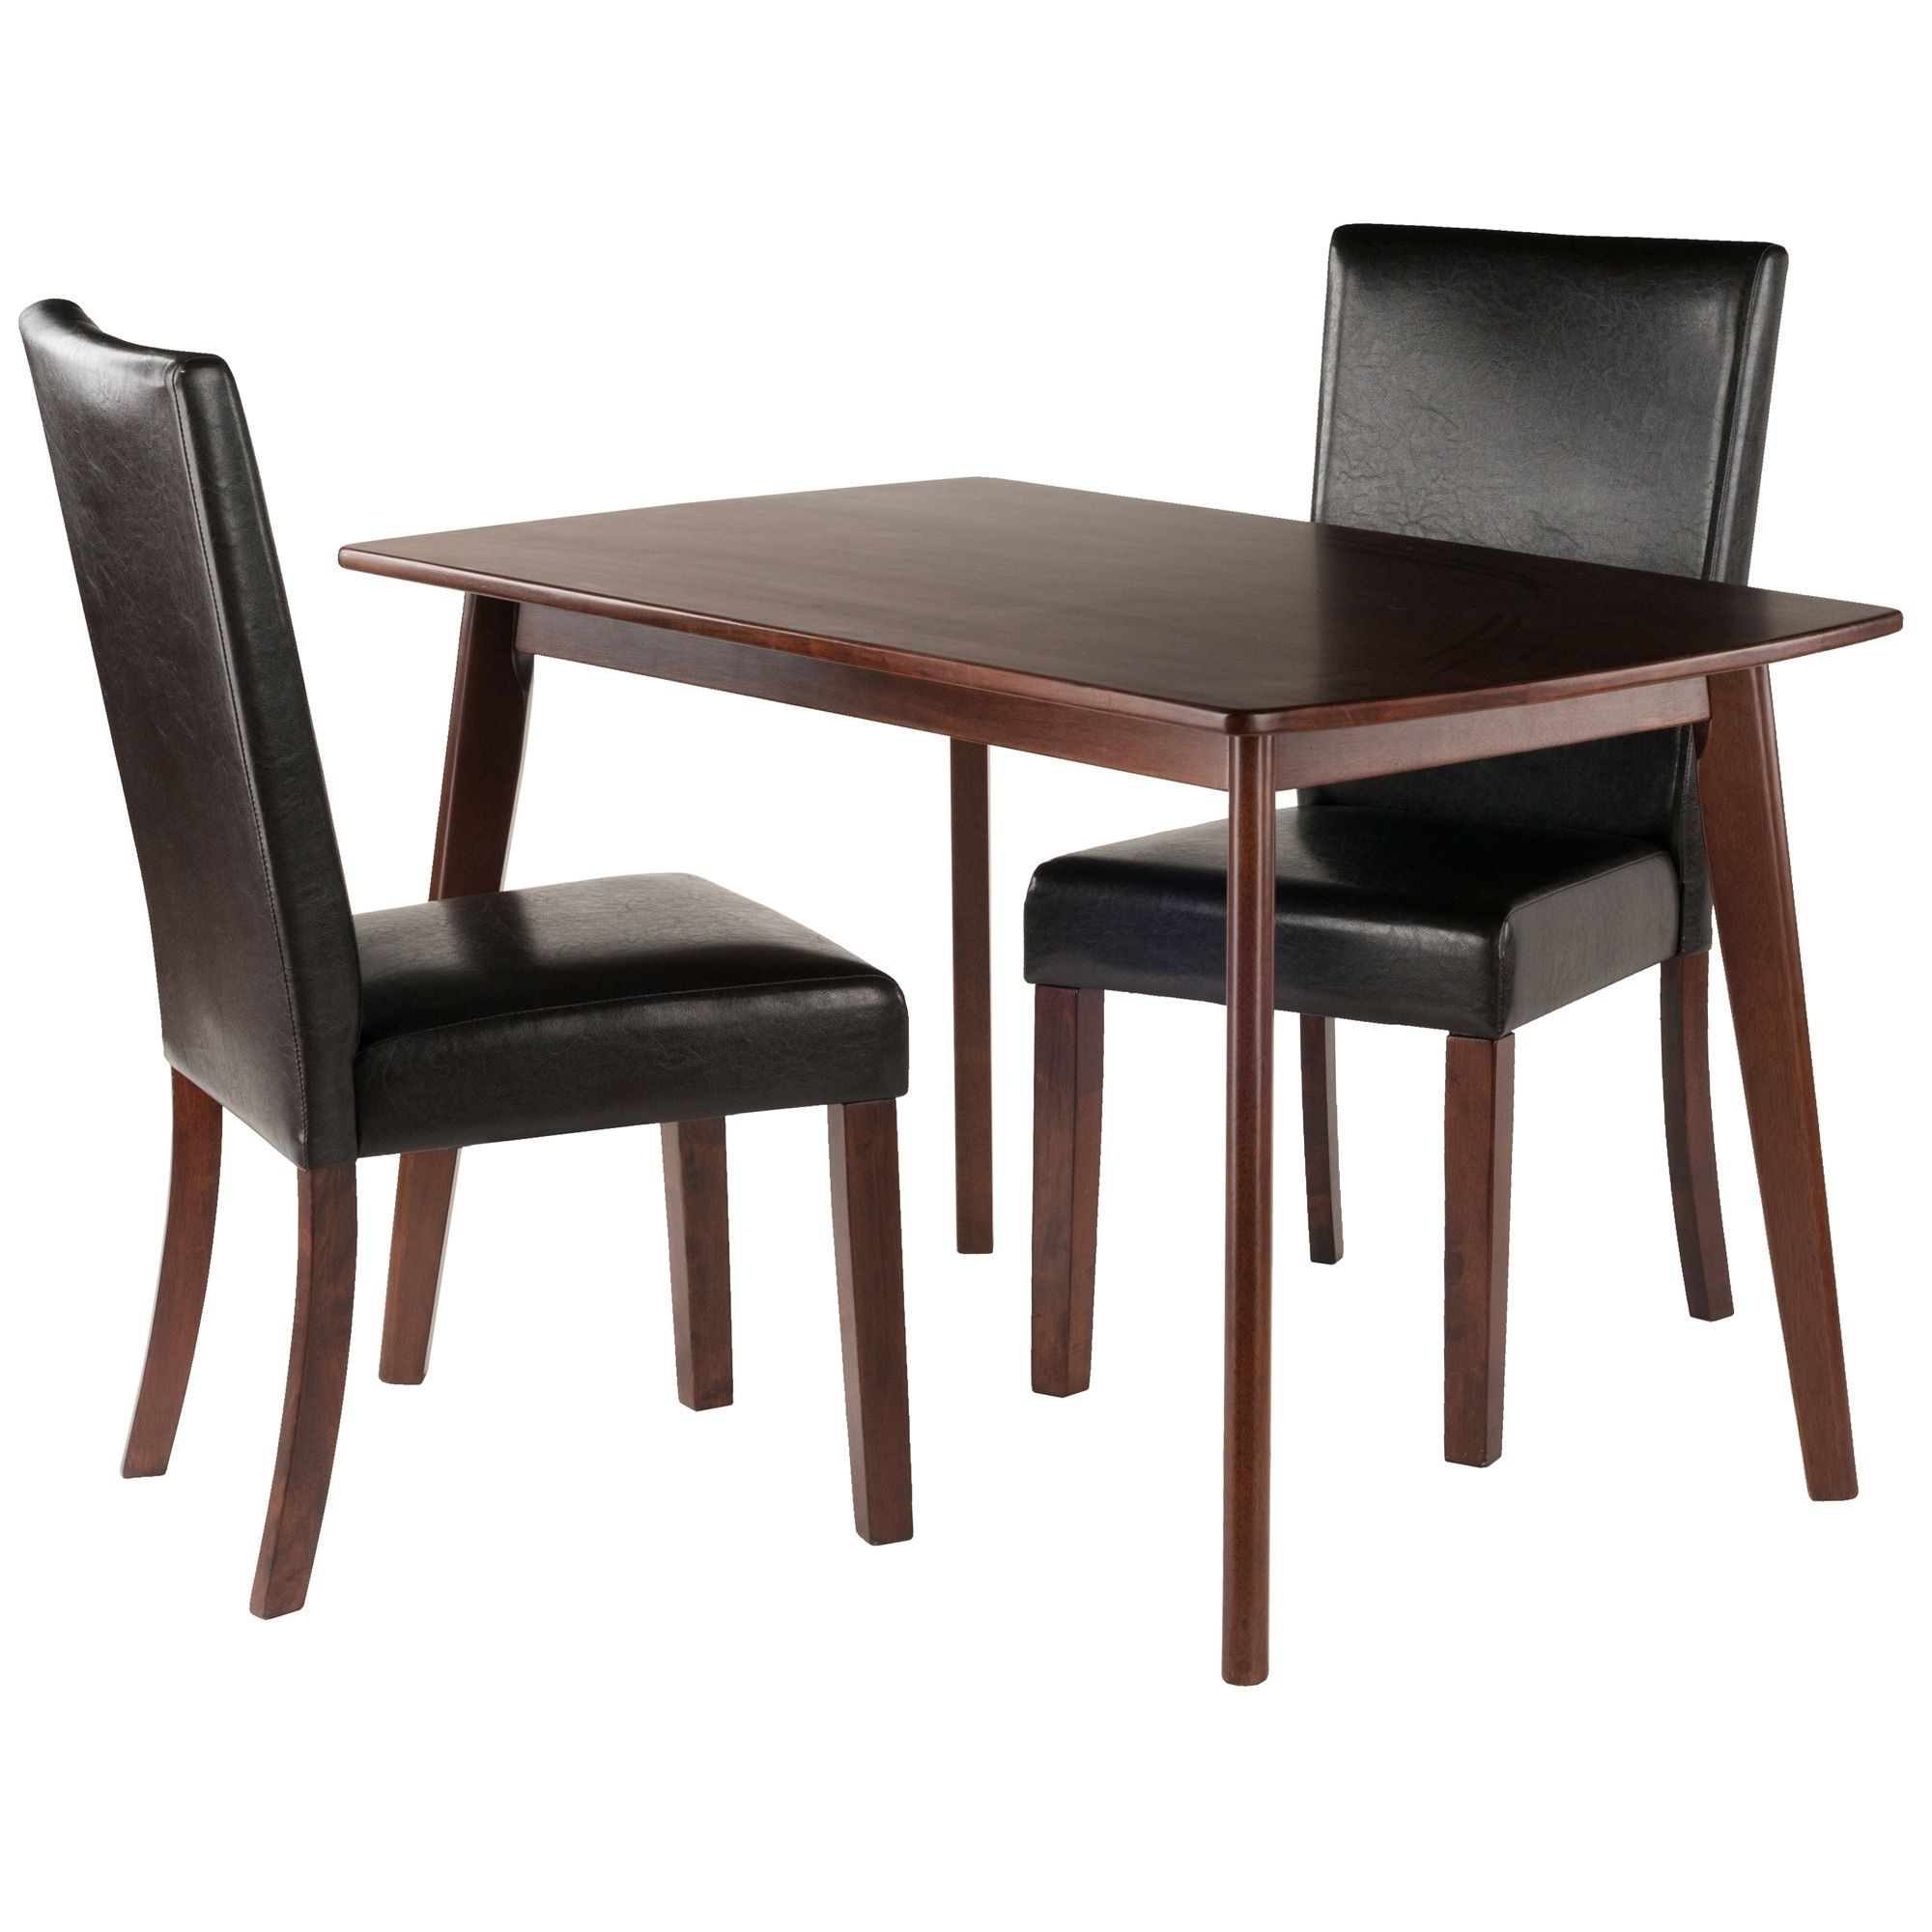 Atwood Transitional Rectangular Dining Tables With Newest Shaye 3 Pc Set Dining Table W/ Chairs, Brown, Winsome Wood (View 19 of 30)